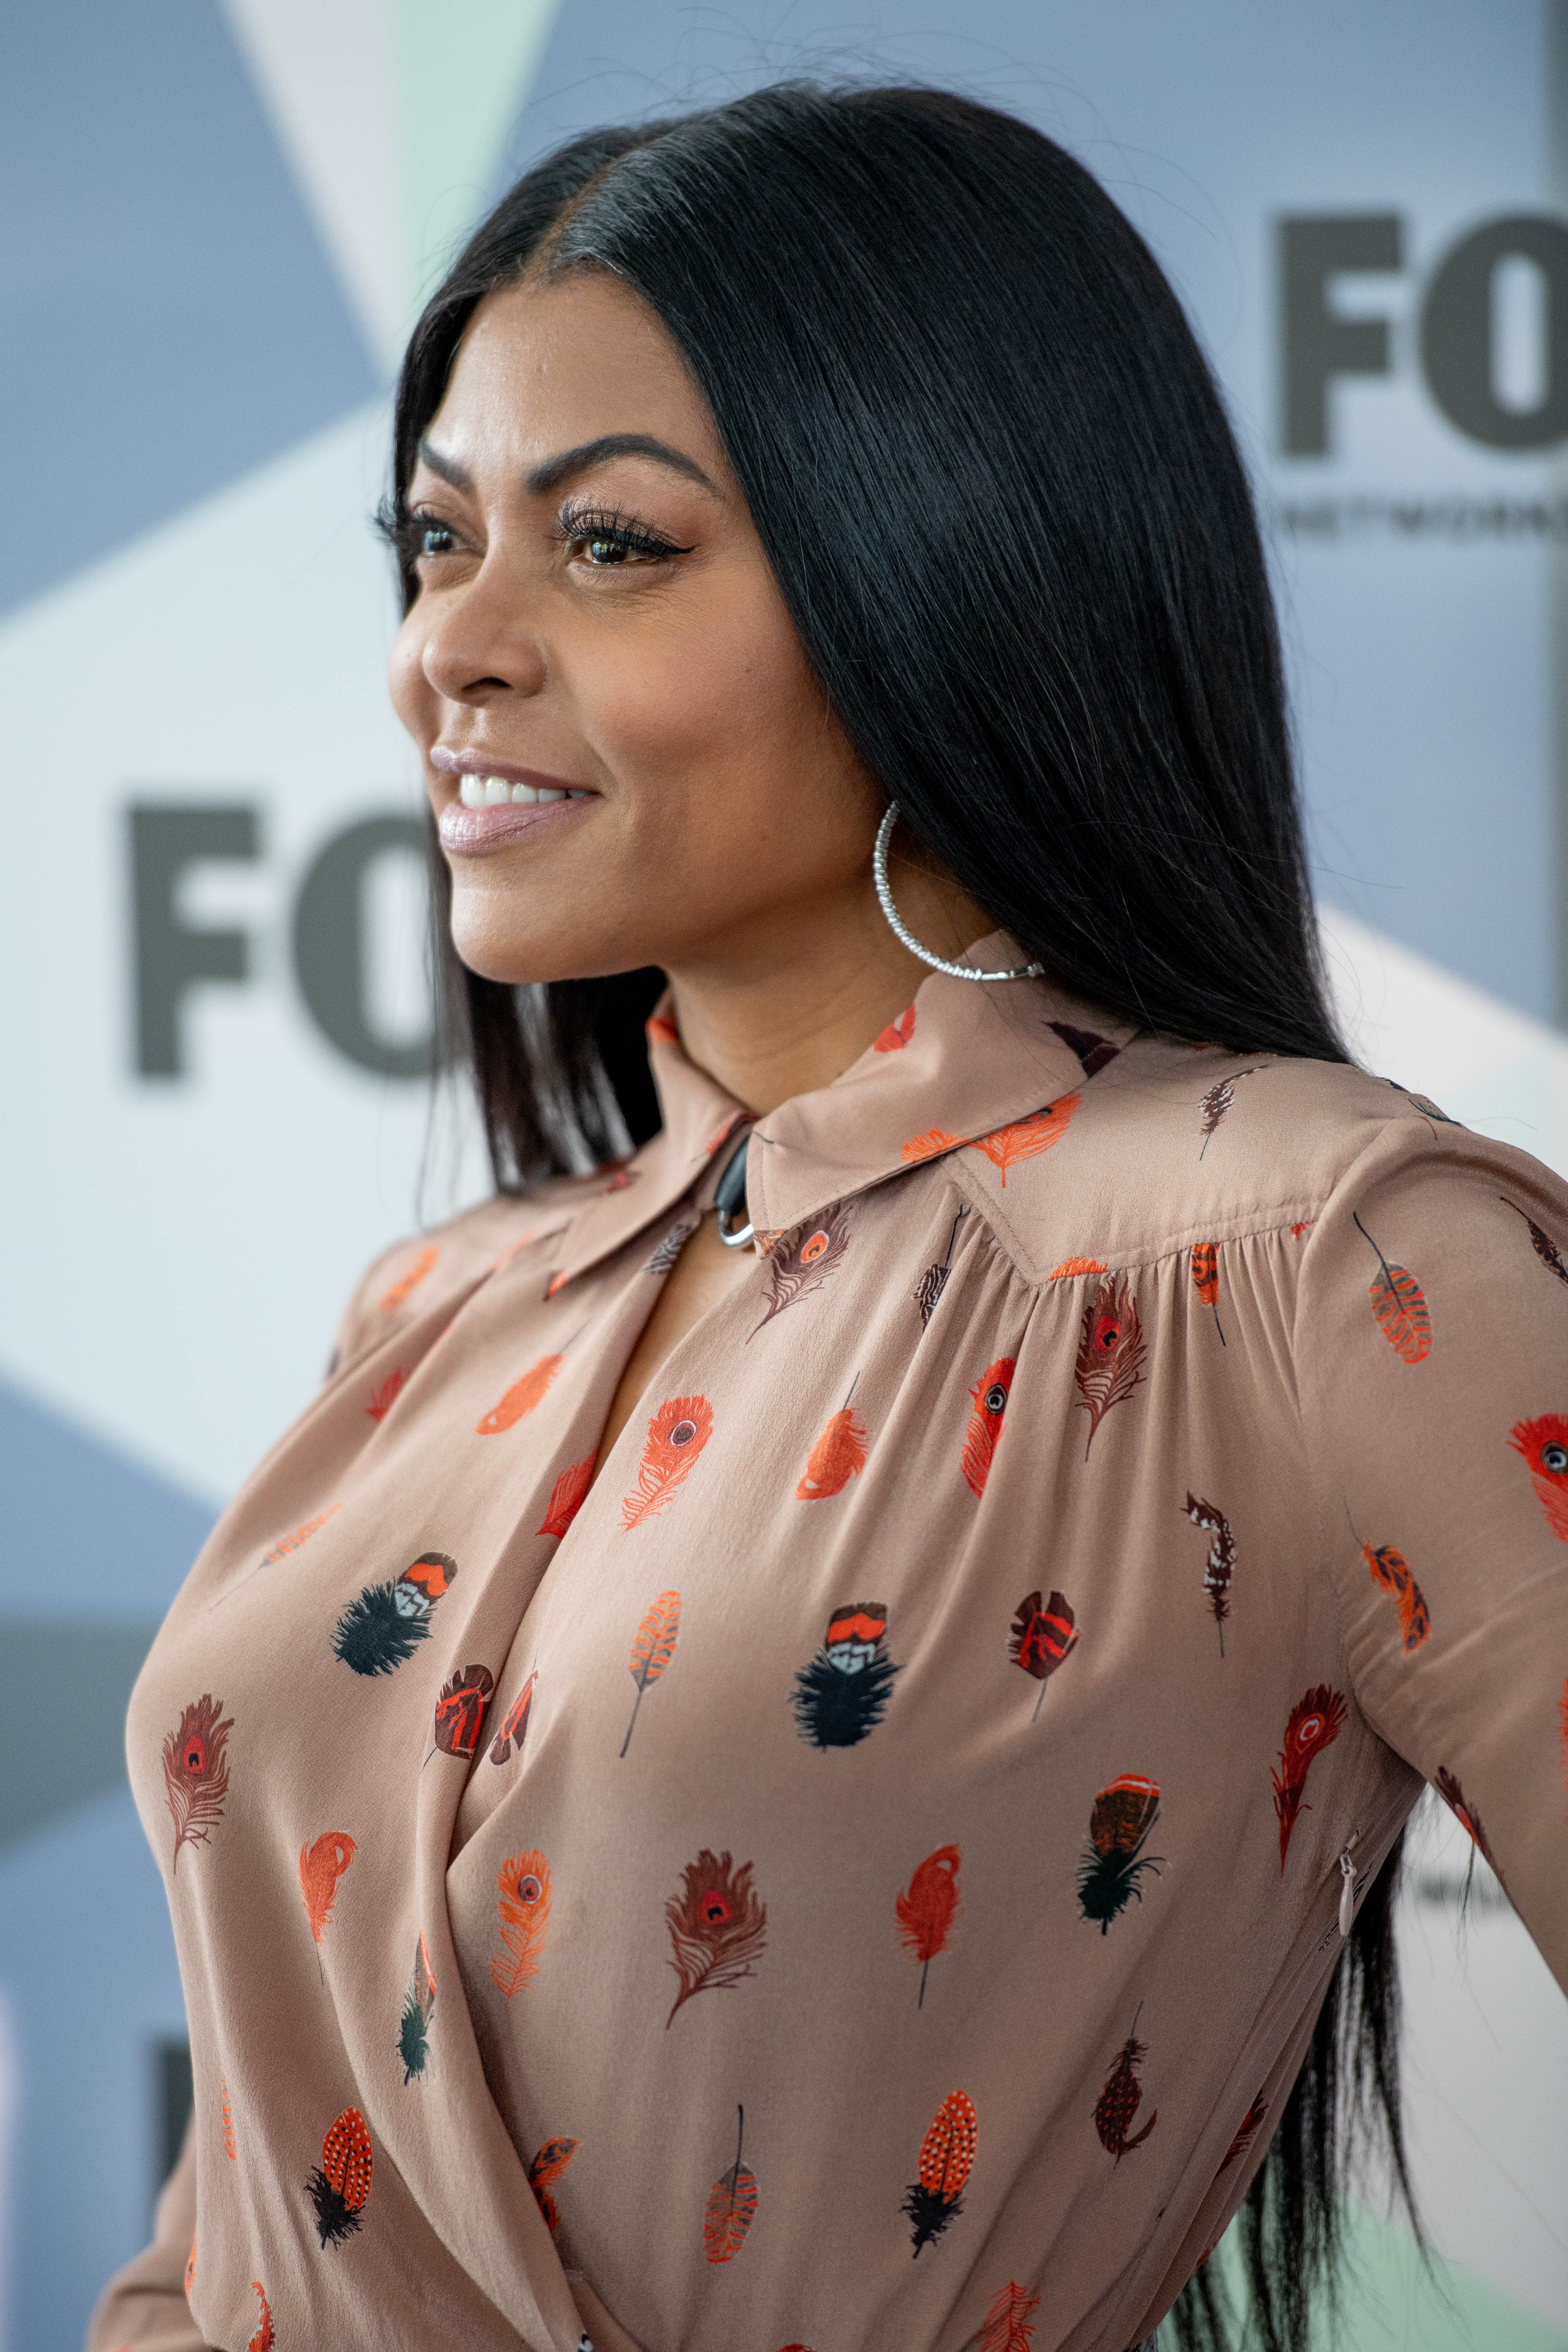 Taraji P. Henson at the 2018 Fox Network Upfront on May 14, 2018 in New York City | Photo: Getty Images